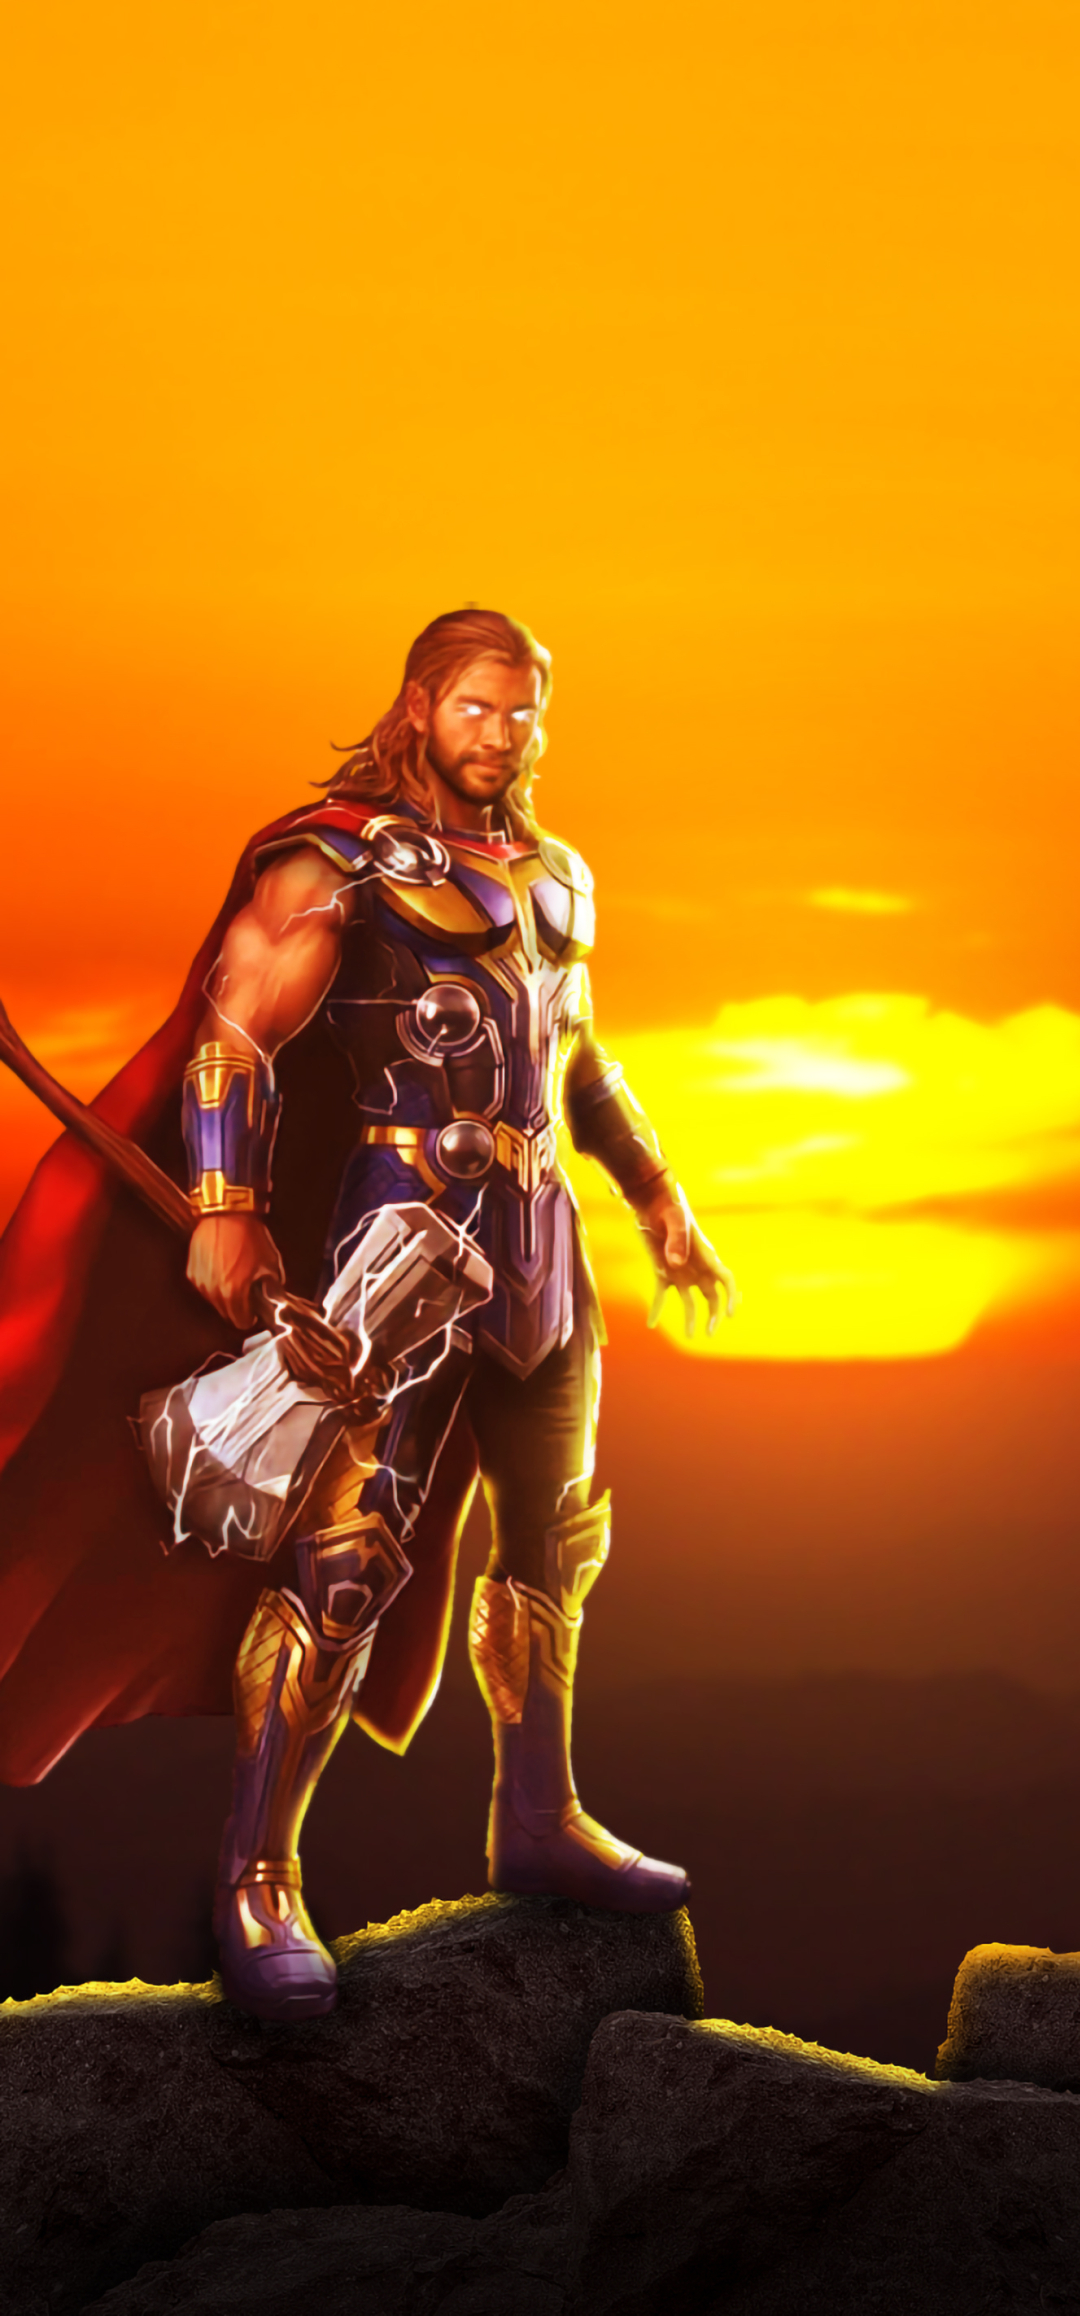 1080x2316 Resolution Thor Love And Thunder Cool Poster Art 1080x2316